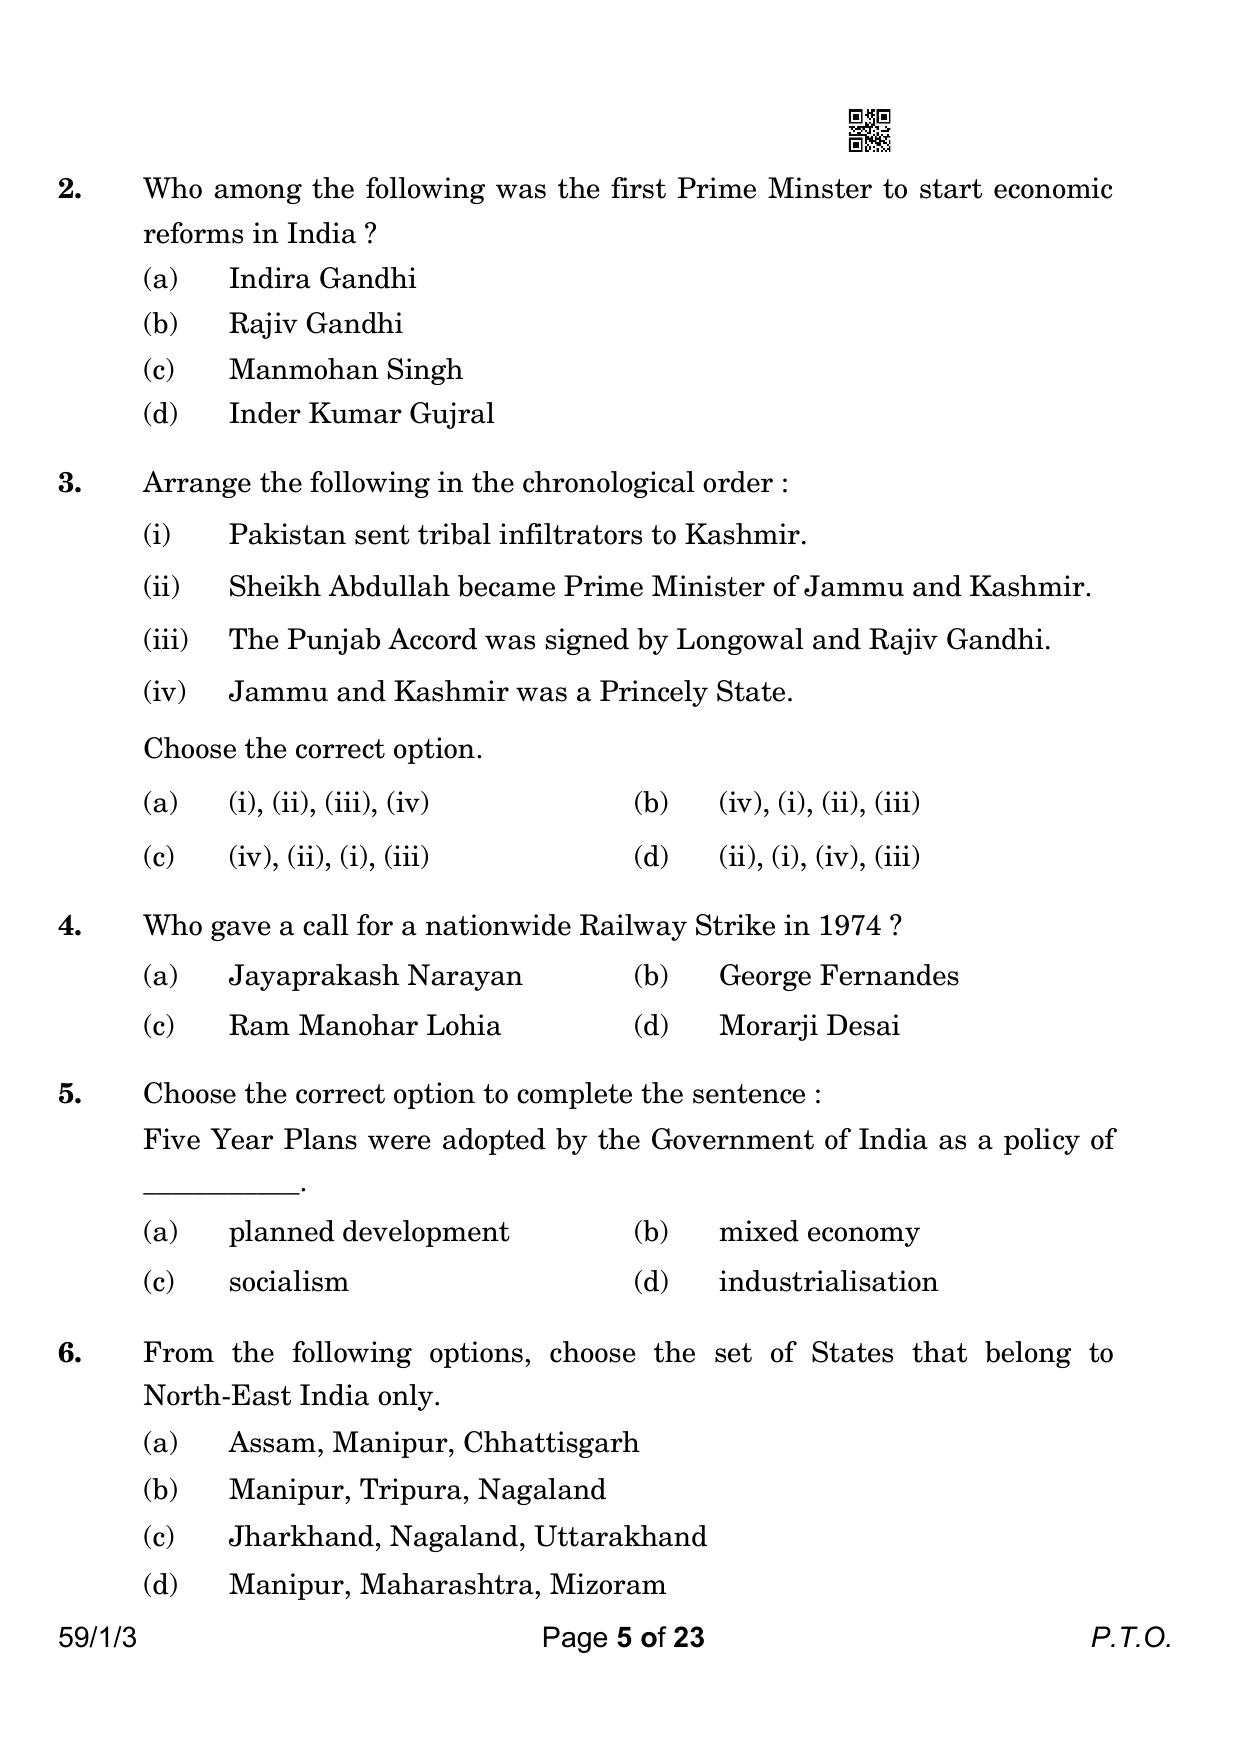 CBSE Class 12 59-1-3 Political Science 2023 Question Paper - Page 5